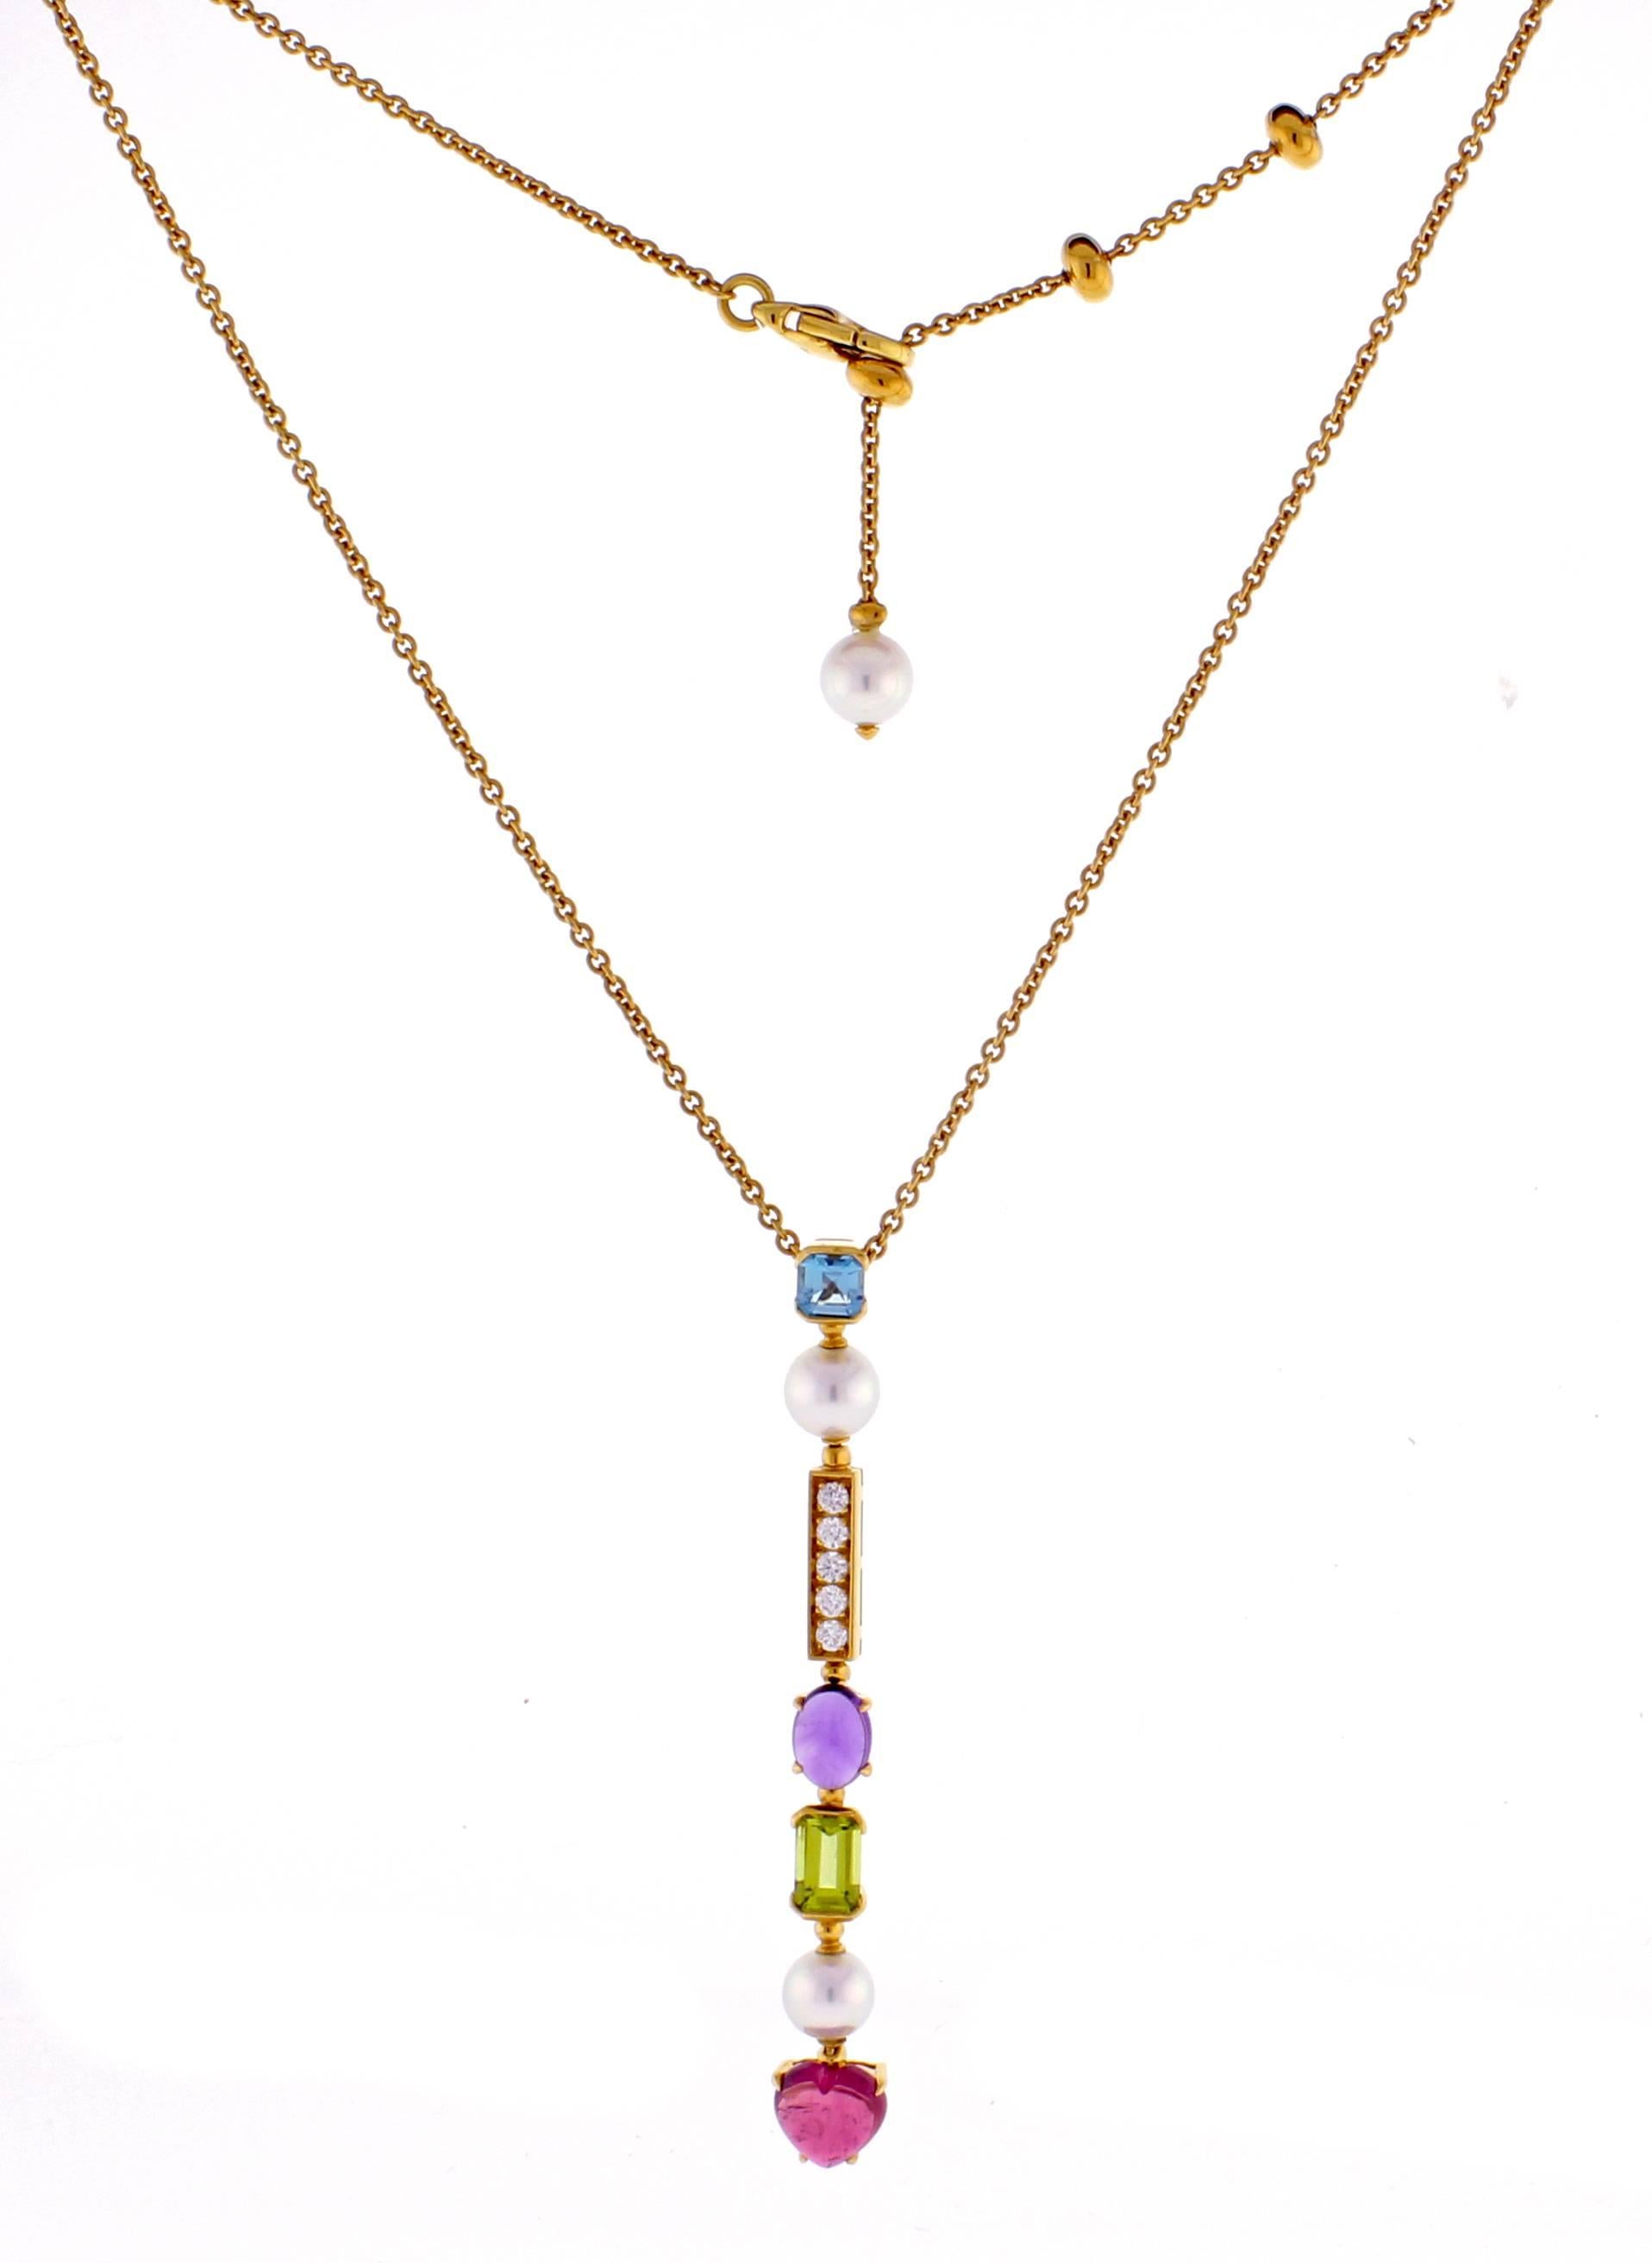 This stunning Bulgaria Allegra multi colored gemstone  and diamond necklace is crafted in 18 karat yellow gold. The necklace is comprized of akoya  pearls, blue topaz, peridot, diamonds and a heart shaped tourmaline. Adjustable from 16-18 inches.